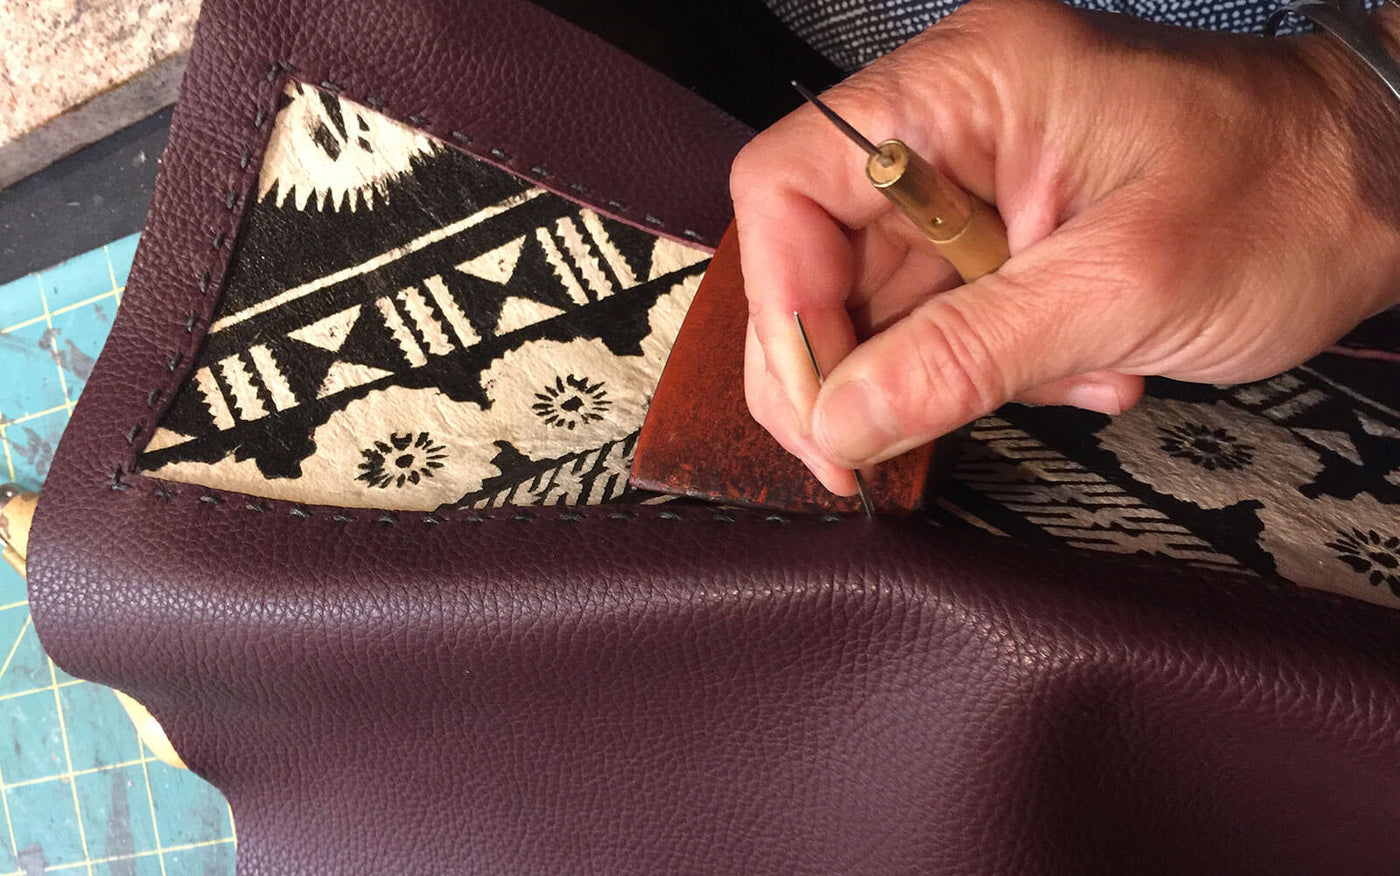 Hand stitching Fijian tapa cloth to leather.  Tote made by Bottega Flaviani handmade leather handbags and accessories brand in San Francisco